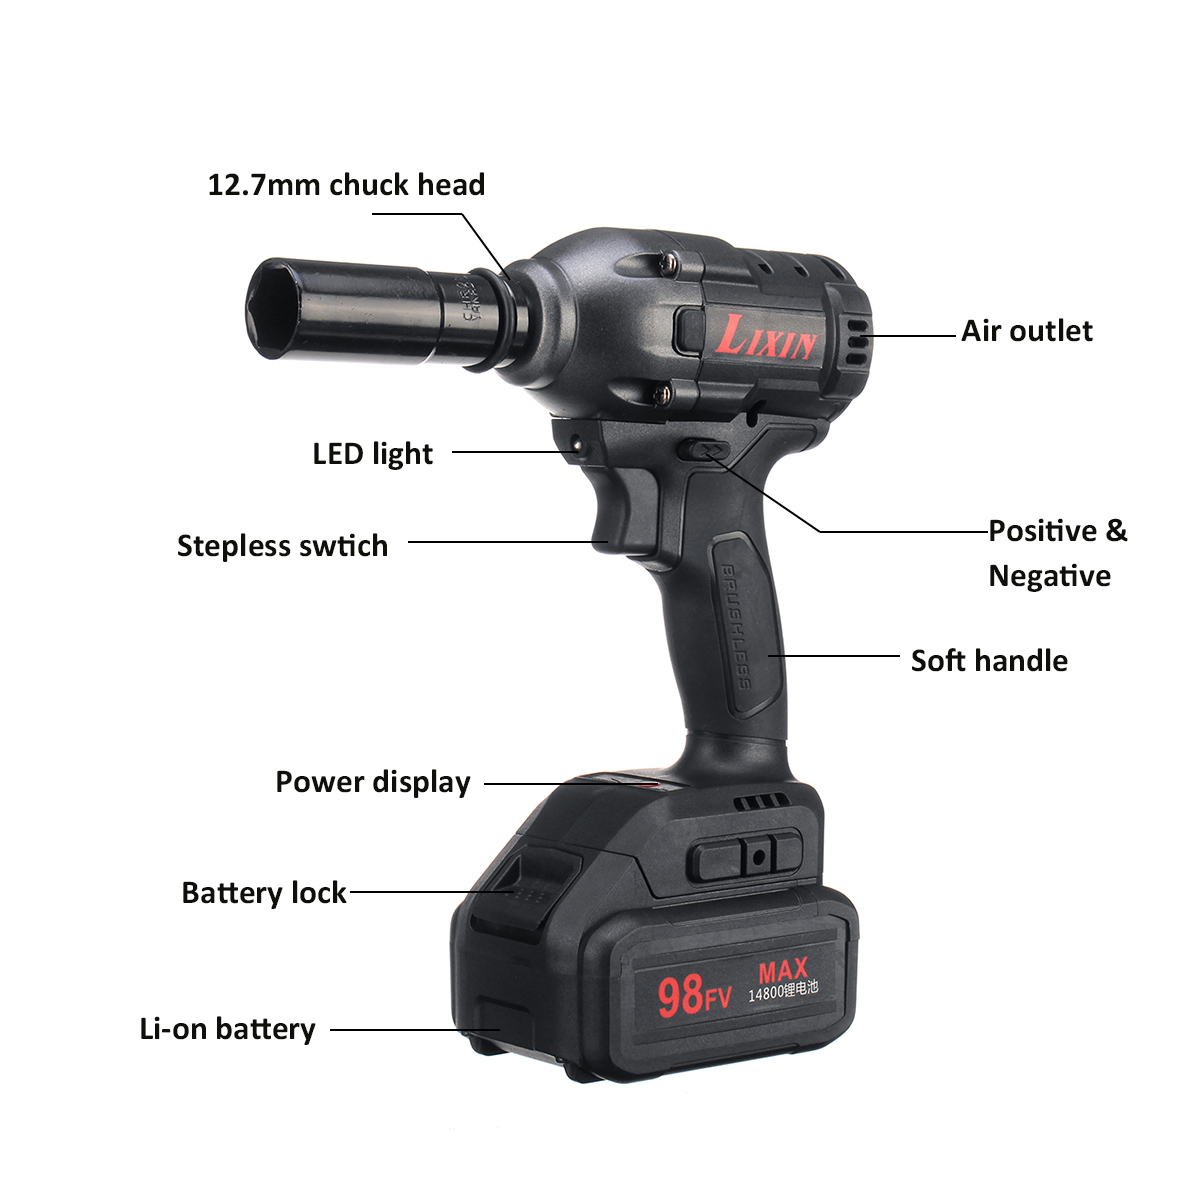 98FV 14800mAh Cordless Brushless Electric Wrench Drill LED Light W/ 1 or 2 Li-on Battery 21